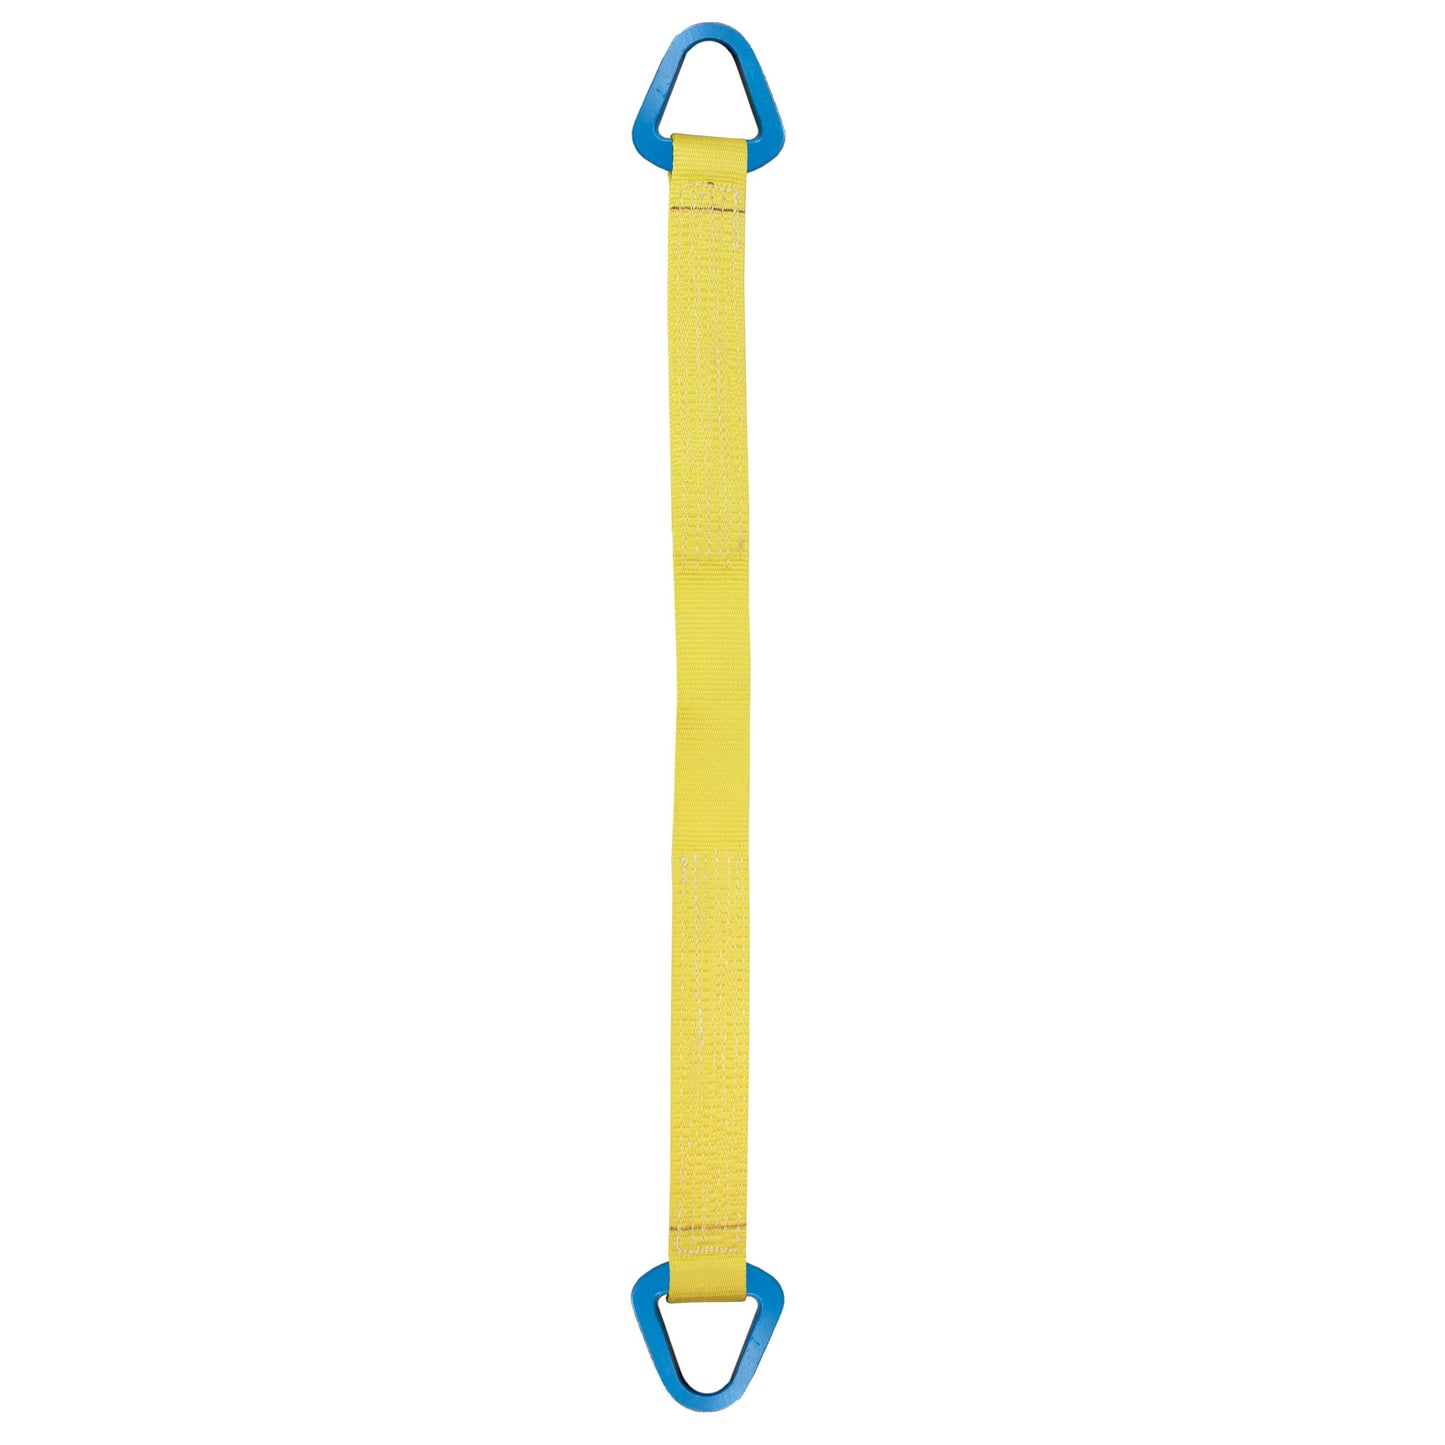 Nylon Lifting Sling Triangle 10 inch x 10 foot 1ply image 1 of 2